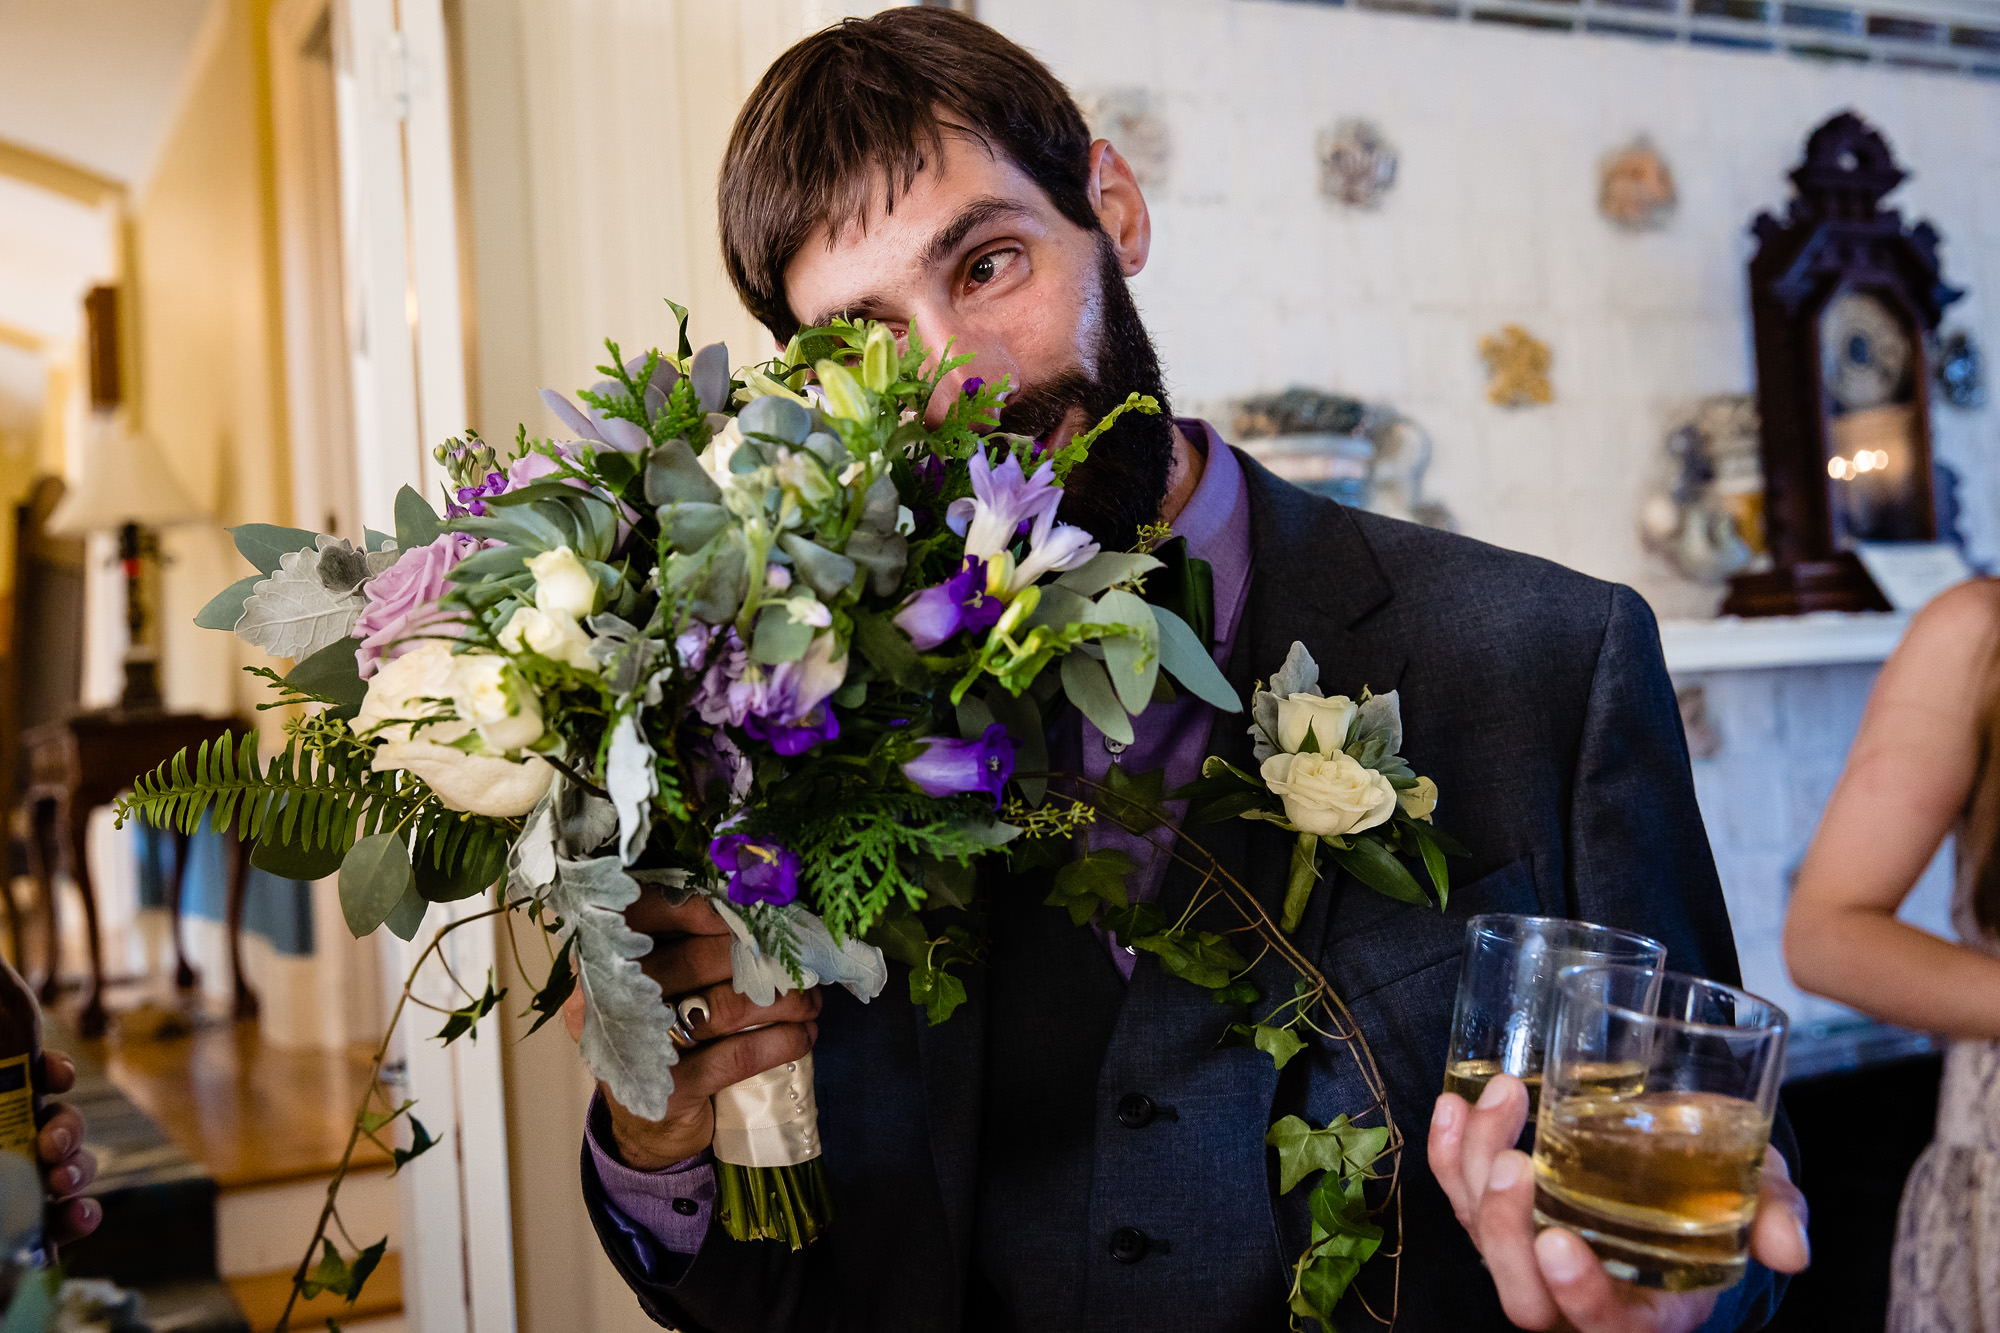 A groom gets emotional during cocktail hour.